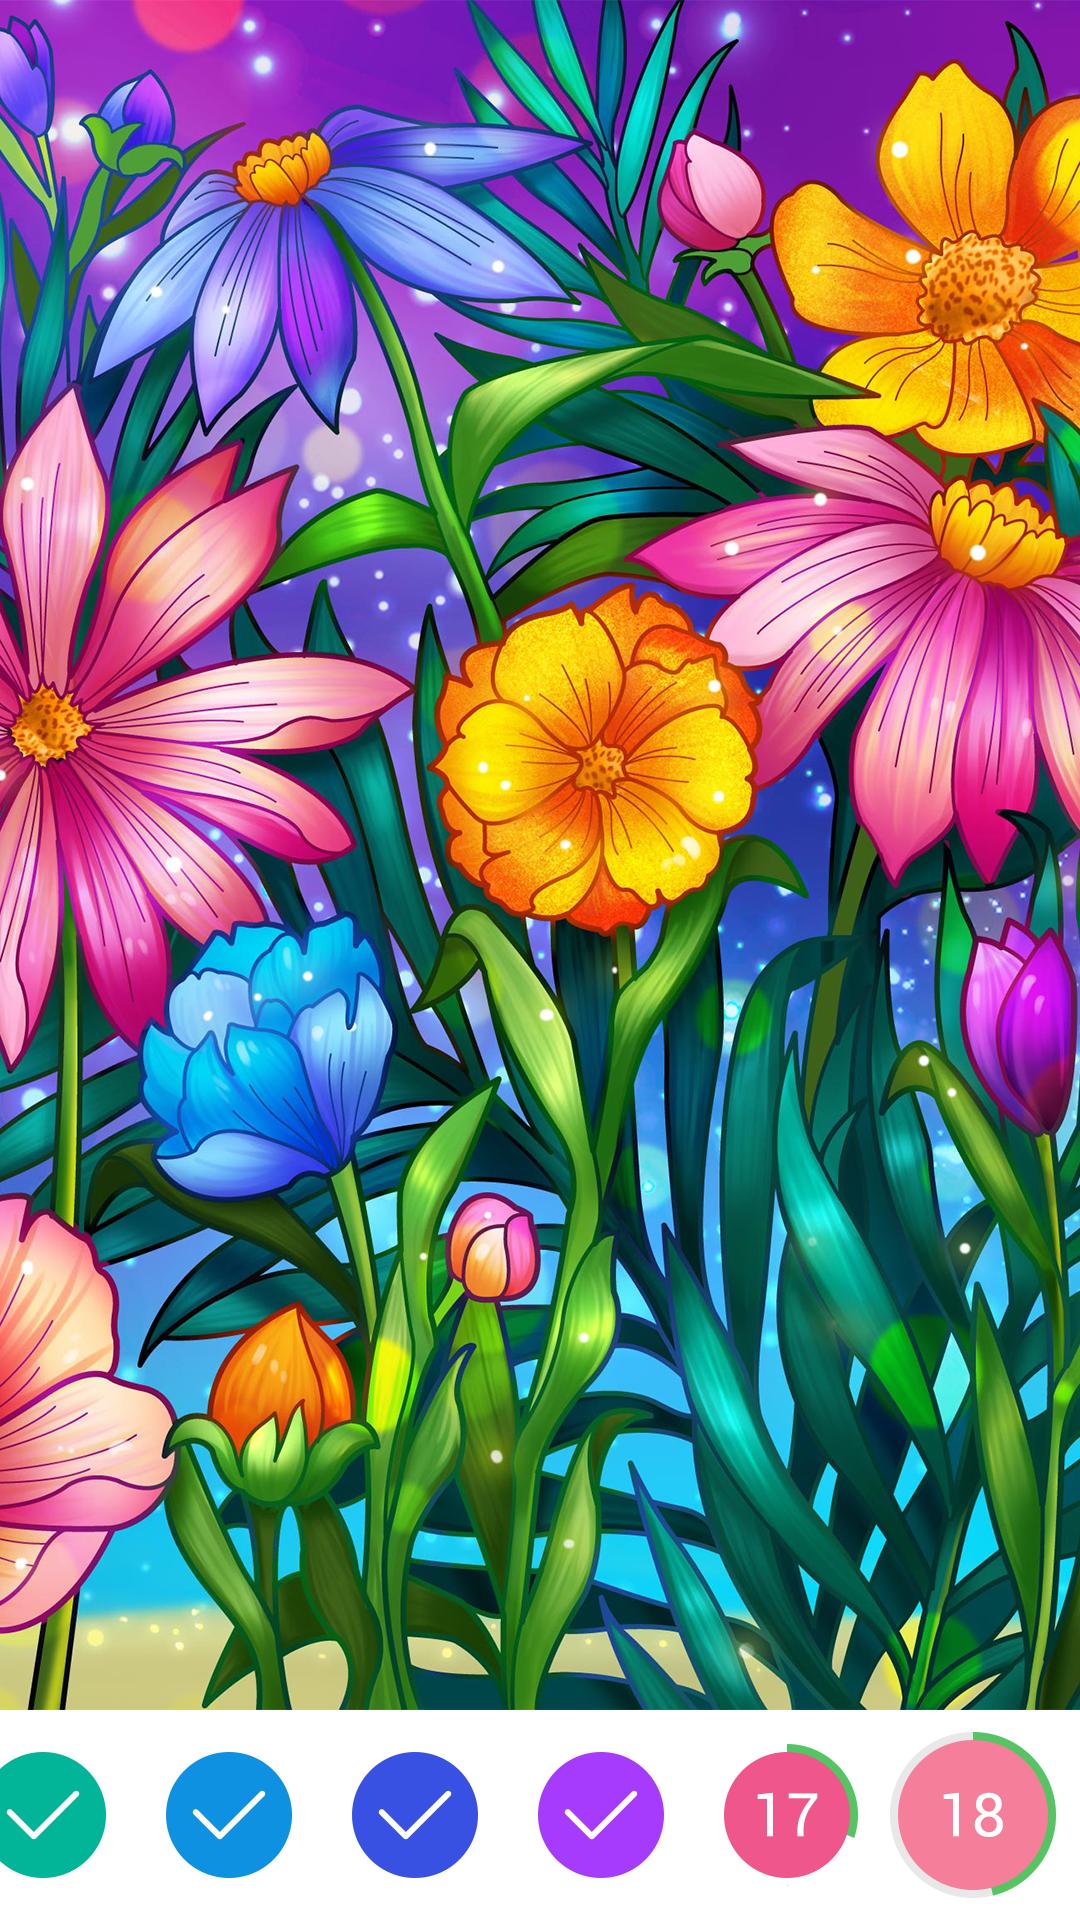 Coloring Book Color by Number & Paint by Number 1.6.11 Screenshot 4